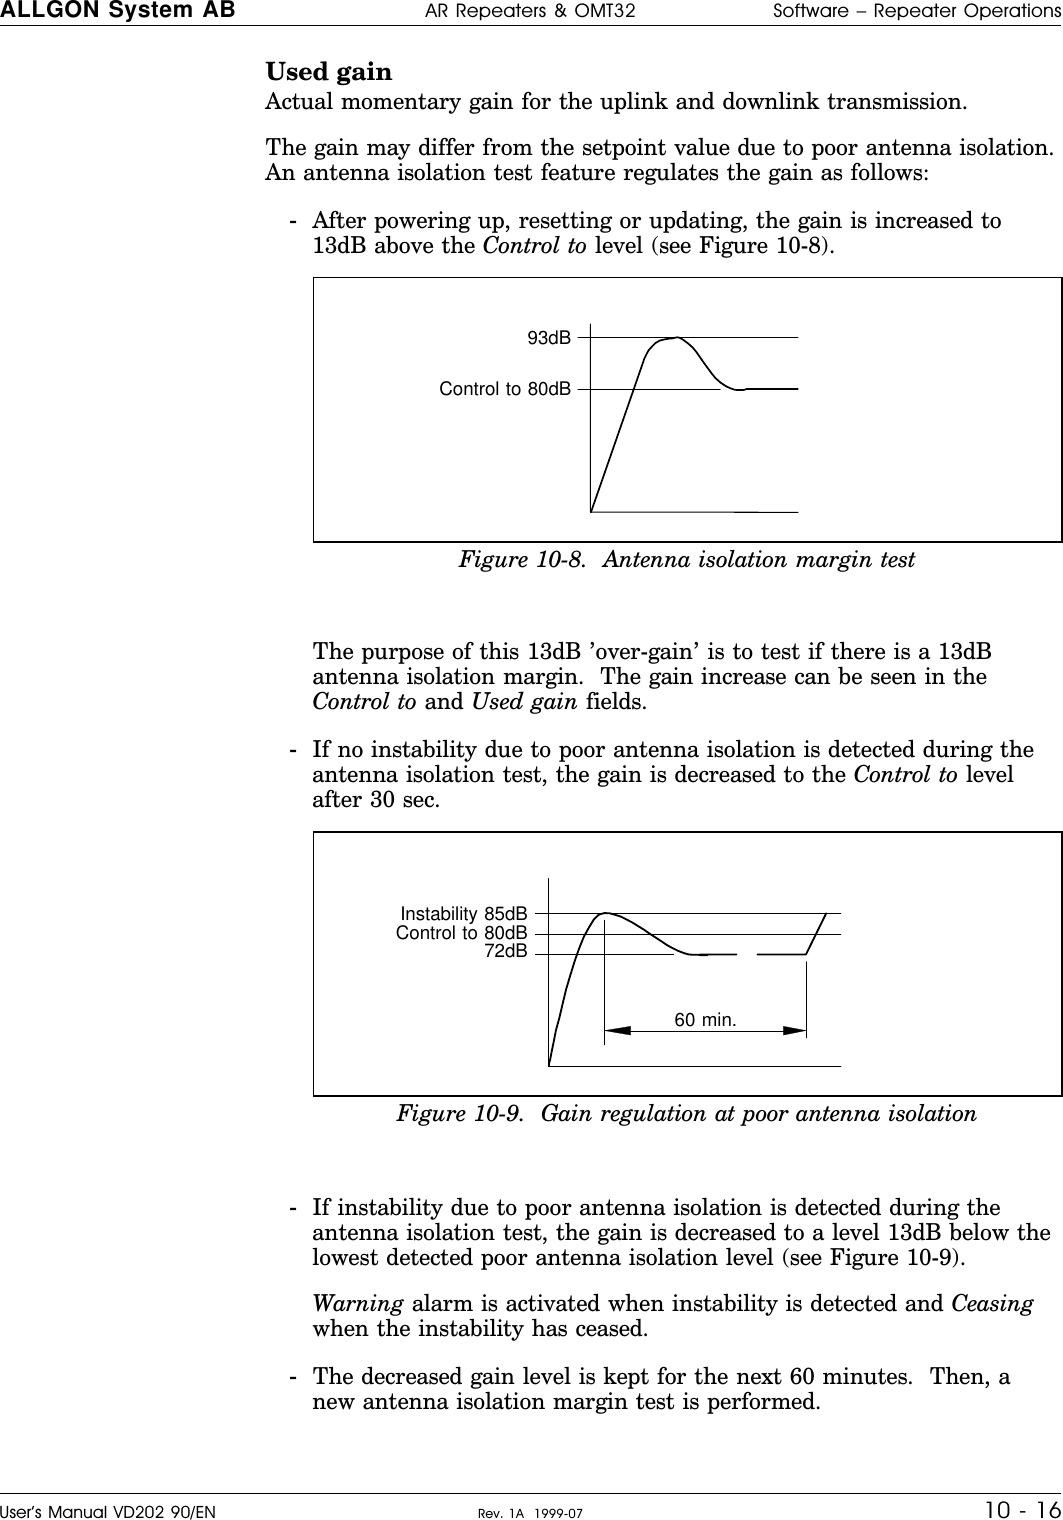 Used gain    Actual momentary gain for the uplink and downlink transmission.The gain may differ from the setpoint value due to poor antenna isolation.An antenna isolation test feature regulates the gain as follows:-After powering up, resetting or updating, the gain is increased to13dB above the Control to level (see Figure 10-8).The purpose of this 13dB ’over-gain’ is to test if there is a 13dBantenna isolation margin.  The gain increase can be seen in theControl to and Used gain fields.-If no instability due to poor antenna isolation is detected during theantenna isolation test, the gain is decreased to the Control to levelafter 30 sec.-If instability due to poor antenna isolation is detected during theantenna isolation test, the gain is decreased to a level 13dB below thelowest detected poor antenna isolation level (see Figure 10-9).Warning alarm is activated when instability is detected and Ceasingwhen the instability has ceased.-The decreased gain level is kept for the next 60 minutes.  Then, anew antenna isolation margin test is performed.93dBControl to 80dBFigure 10-8.  Antenna isolation margin testInstability 85dBControl to 80dB72dB60 min.Figure 10-9.  Gain regulation at poor antenna isolationALLGON System AB AR Repeaters &amp; OMT32 Software – Repeater OperationsUser’s Manual VD202 90/EN Rev. 1A  1999-07 10 - 16